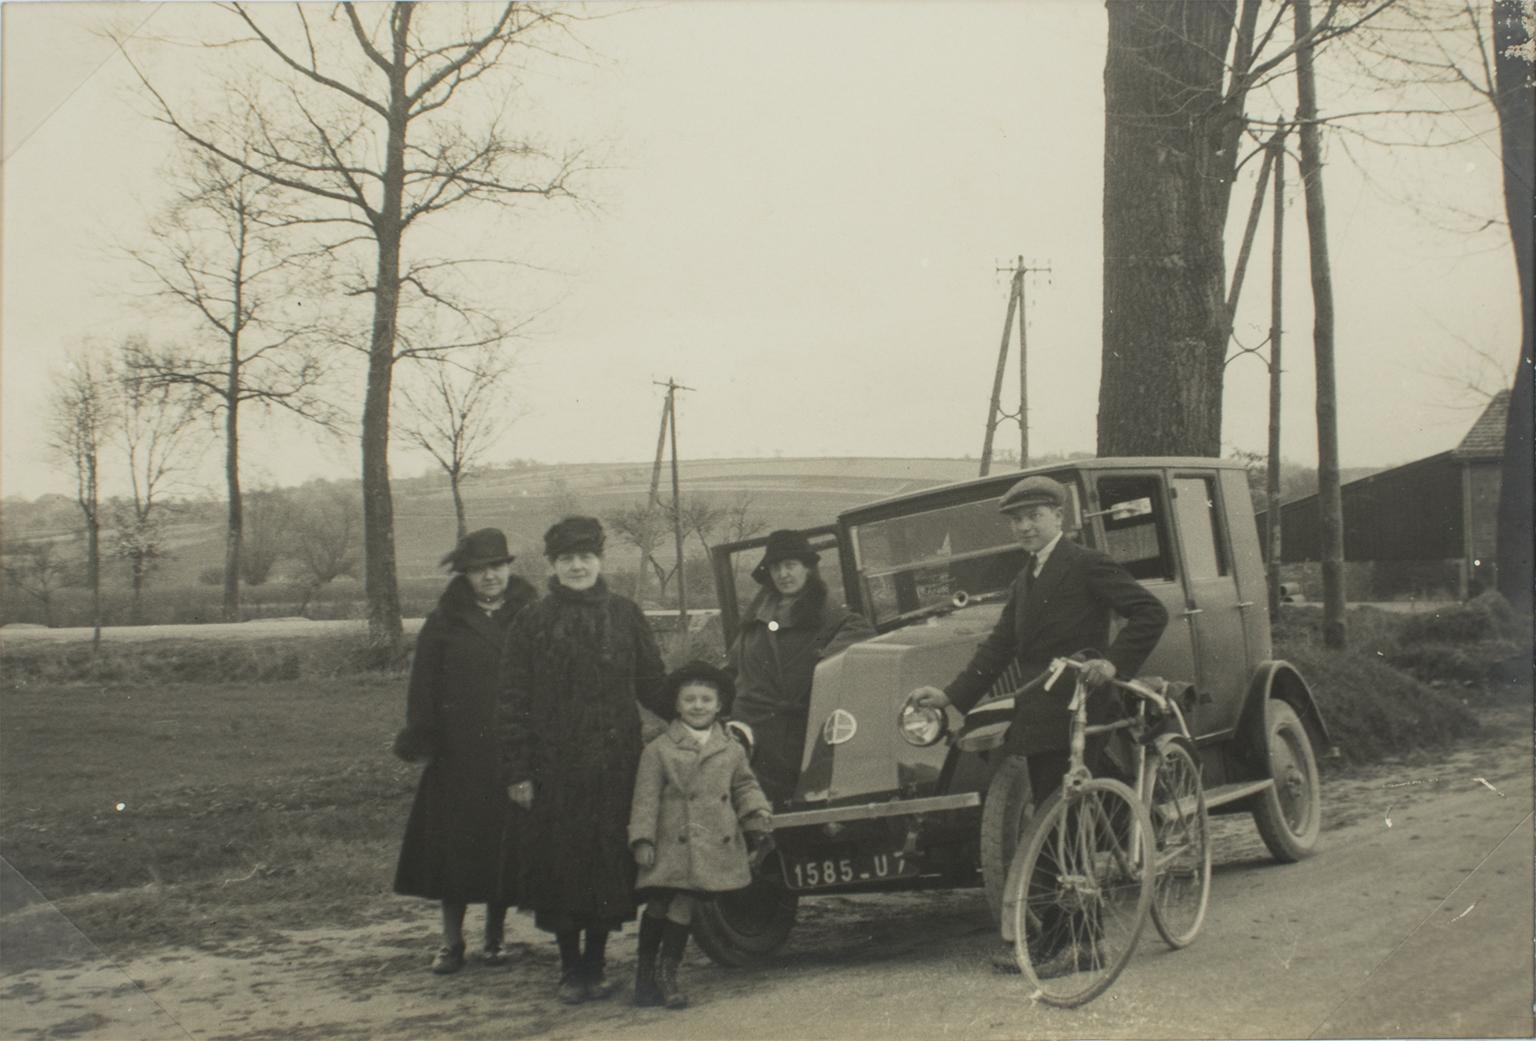 A unique original silver gelatin black and white photograph. A family on the road near Paris, France, circa 1930. The car in the background is a Renault KZ. 
Features:
Original Silver Gelatin Print Photography Unframed.
Press Photography.
Press